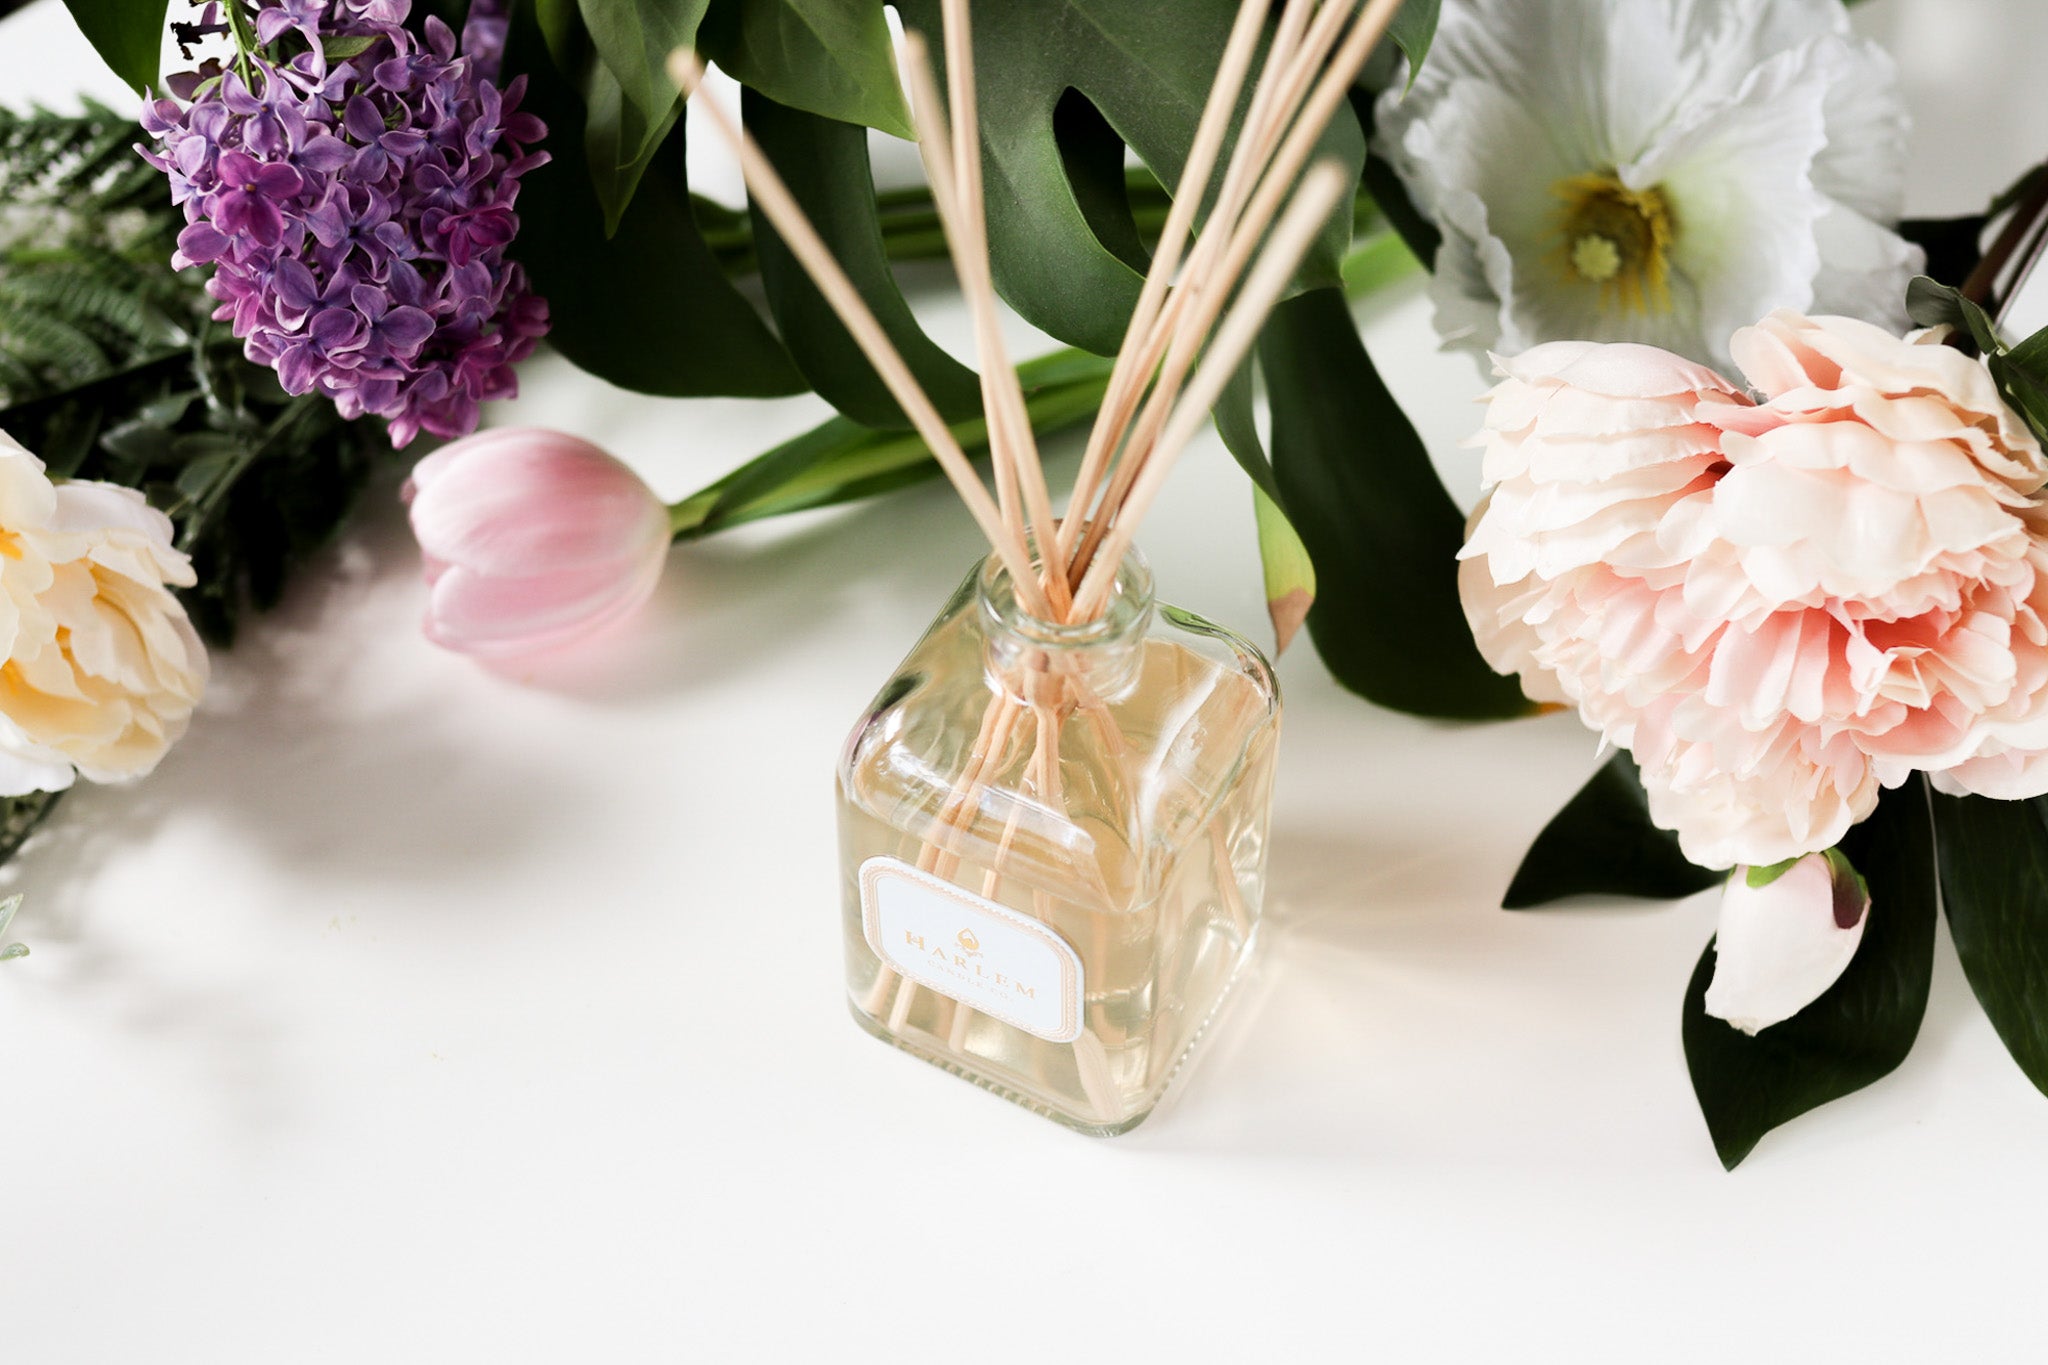 This is an image of a clear glass "Dream" Botanical Diffuser bottle with purple, white, and pink flowers in the background.